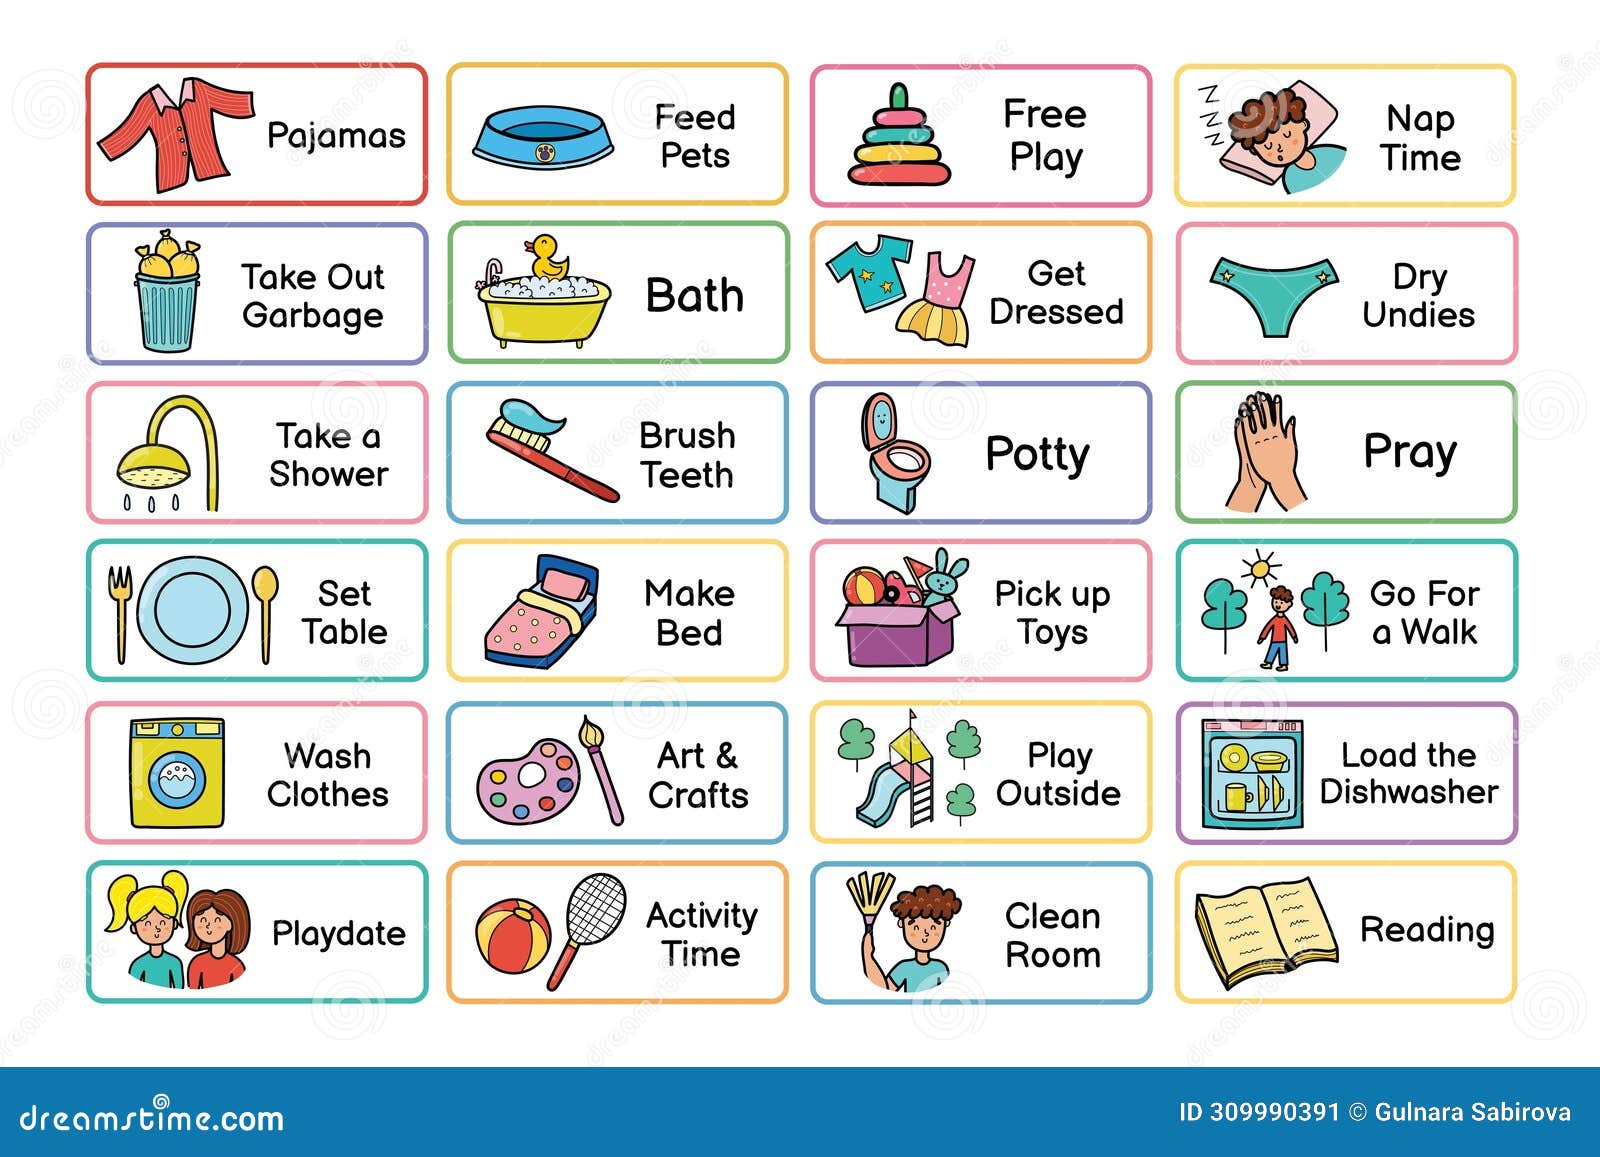 kids daily routine chores collection. responsibilities list for the chore chart